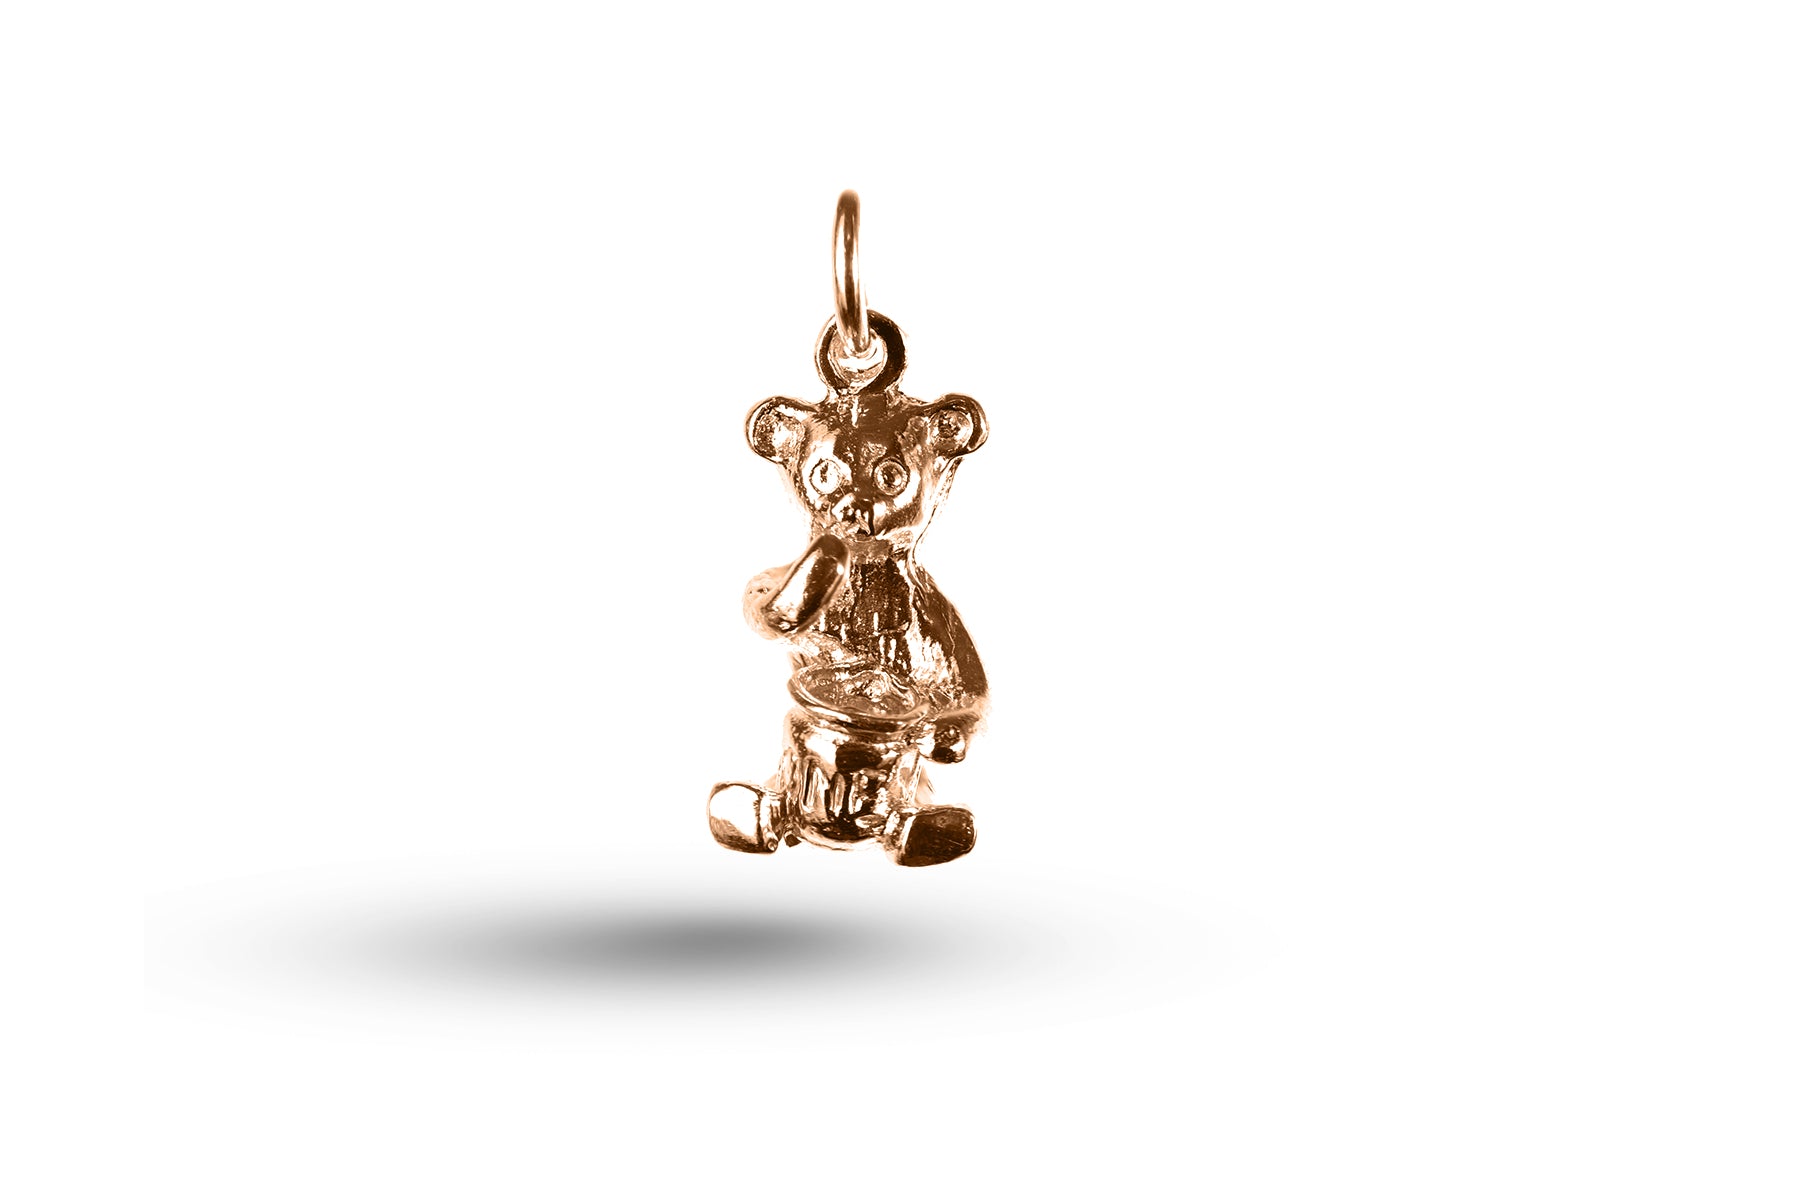 Rose gold Teddy with Honey Pot charm.